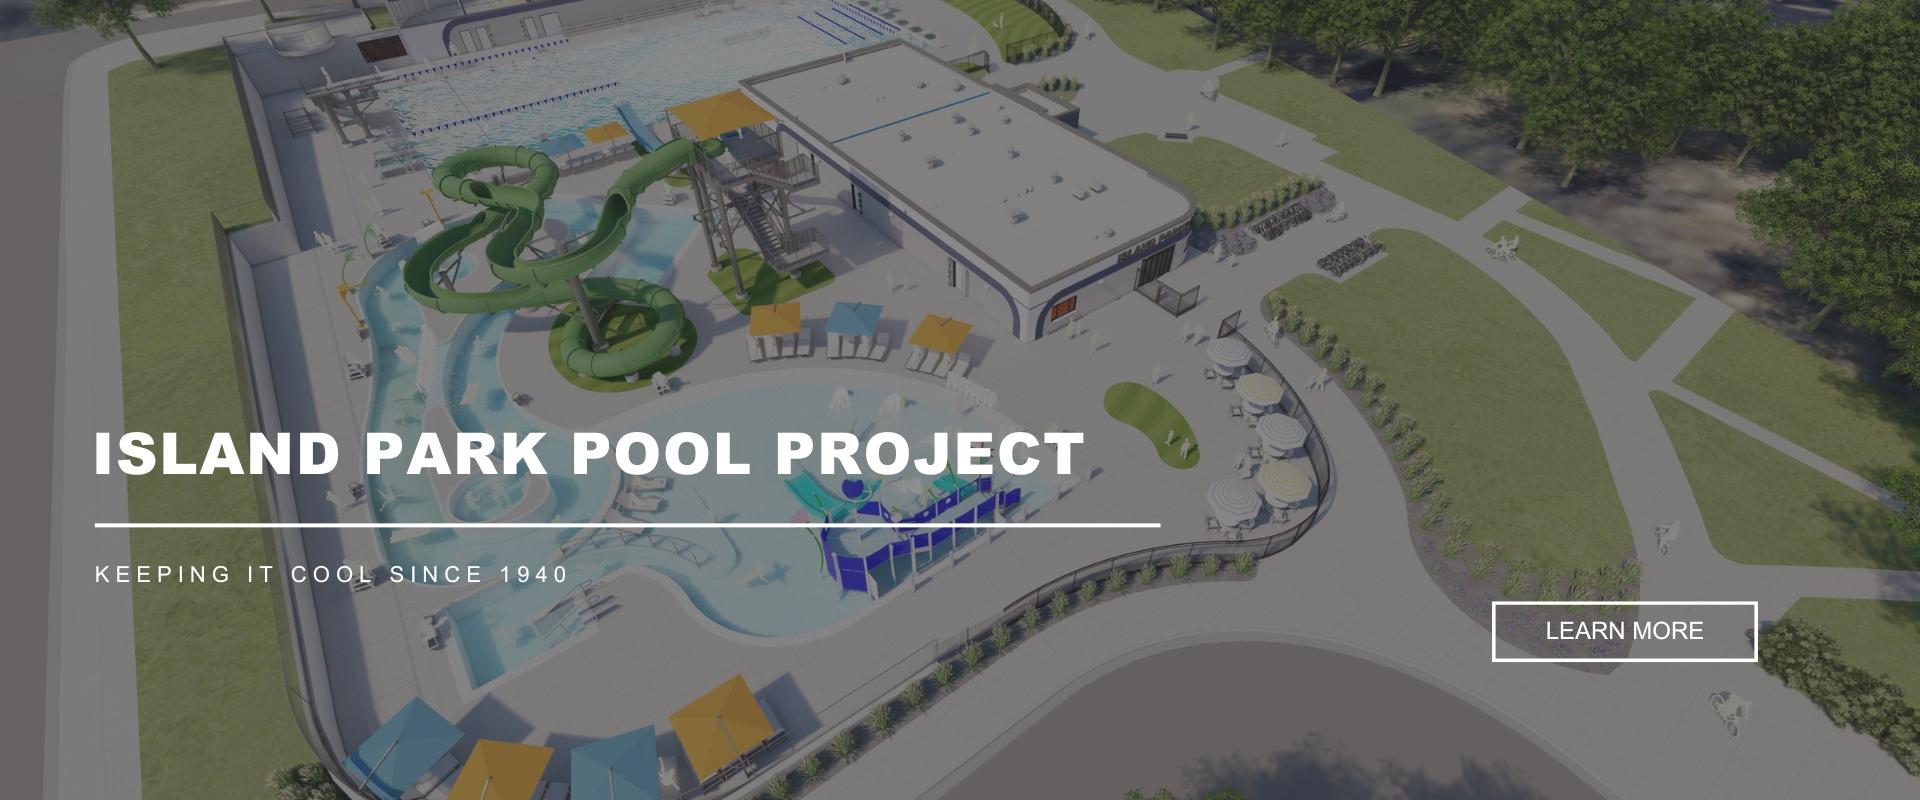 ISLAND PARK POOL PROJECT - Keeping It Cool Since 1940 - Rendering of the updated Island Park Pool - Learn More 